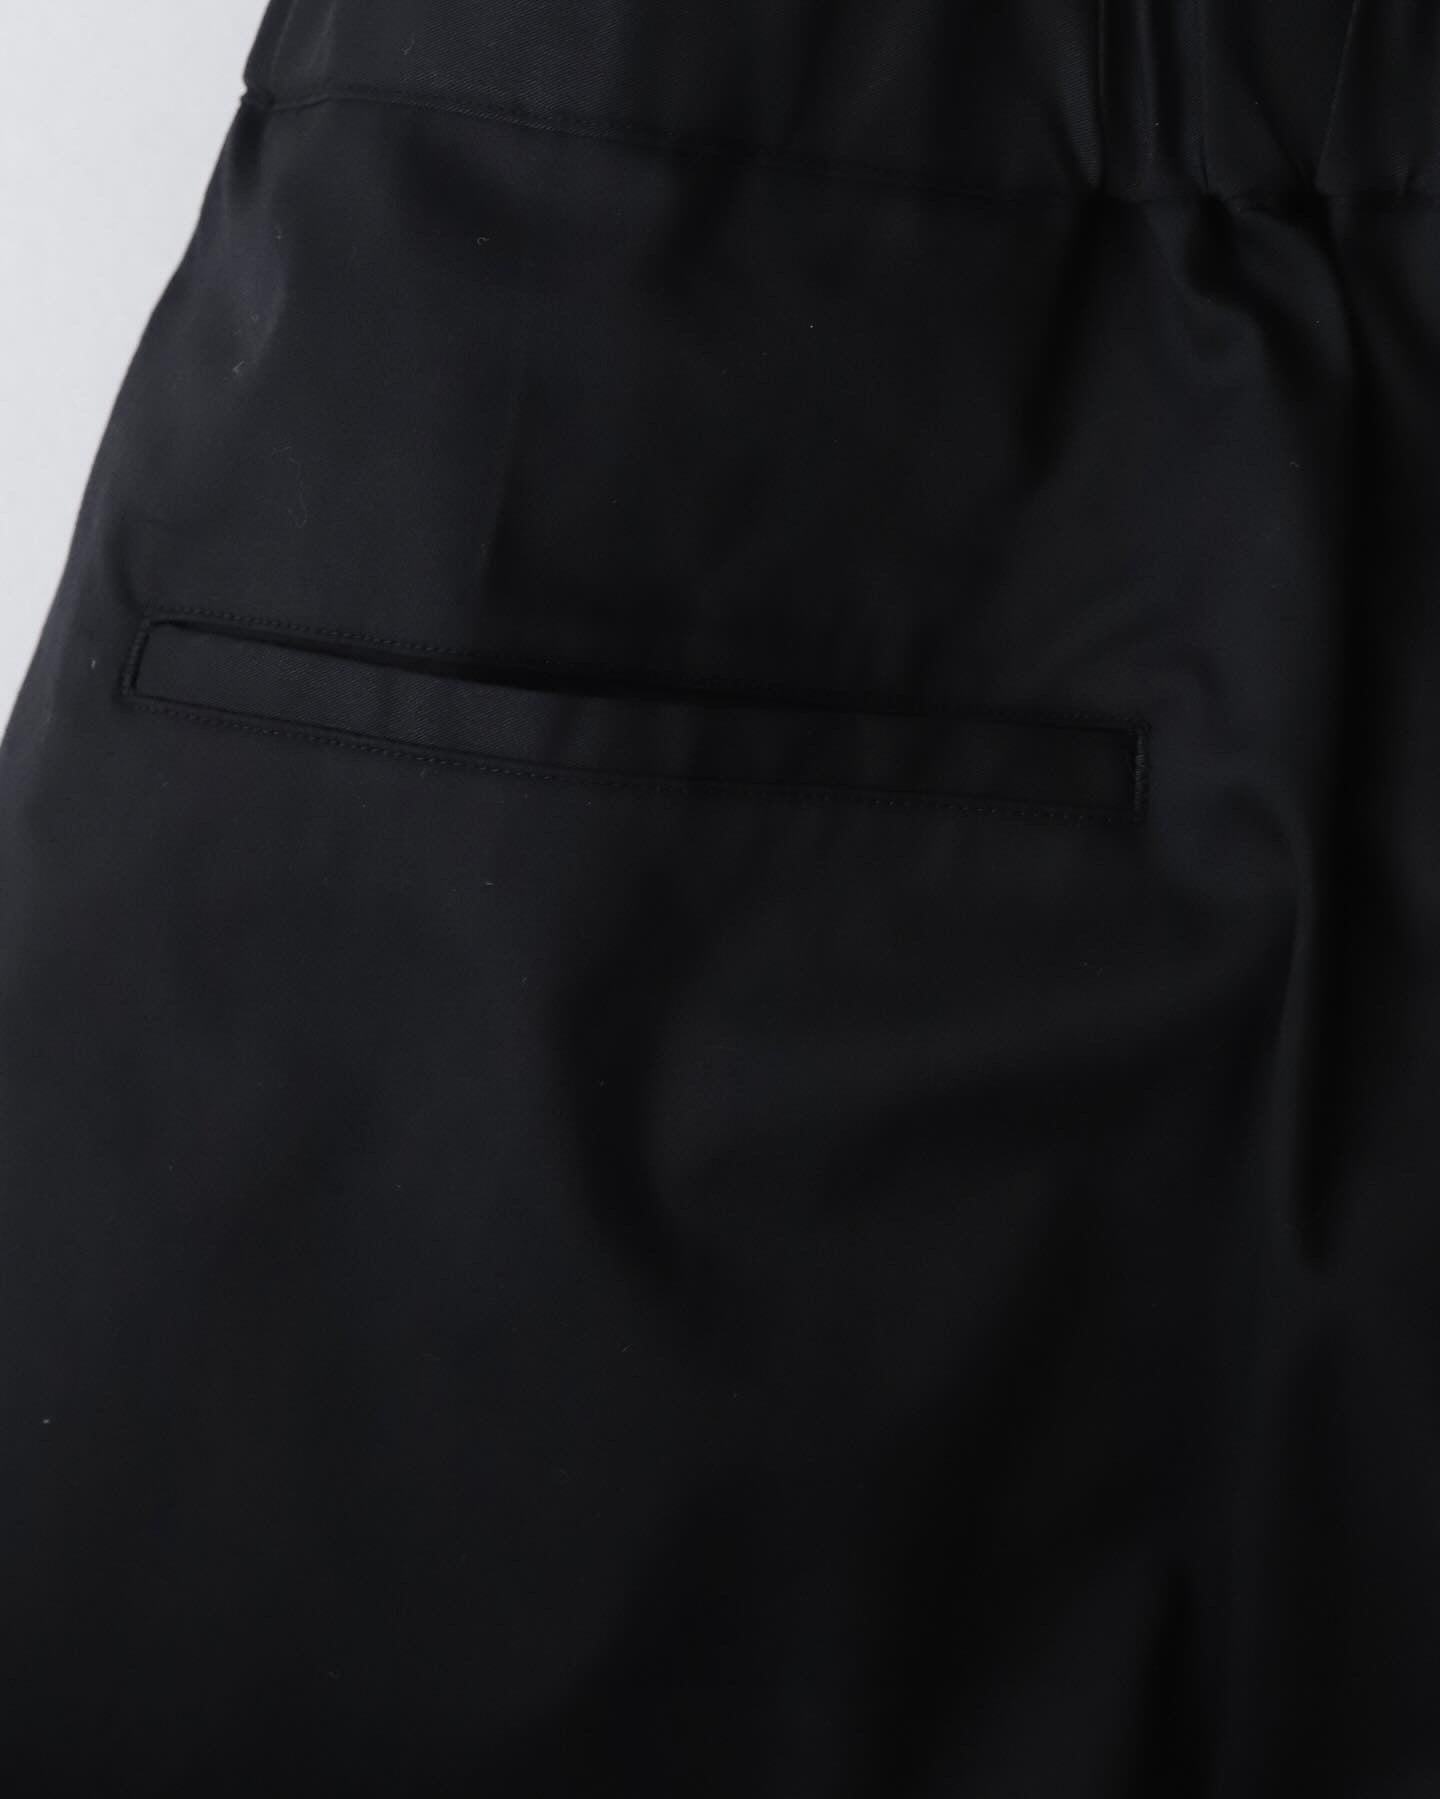 SOLOTEX TWILL WIDE CHEF SHORTS